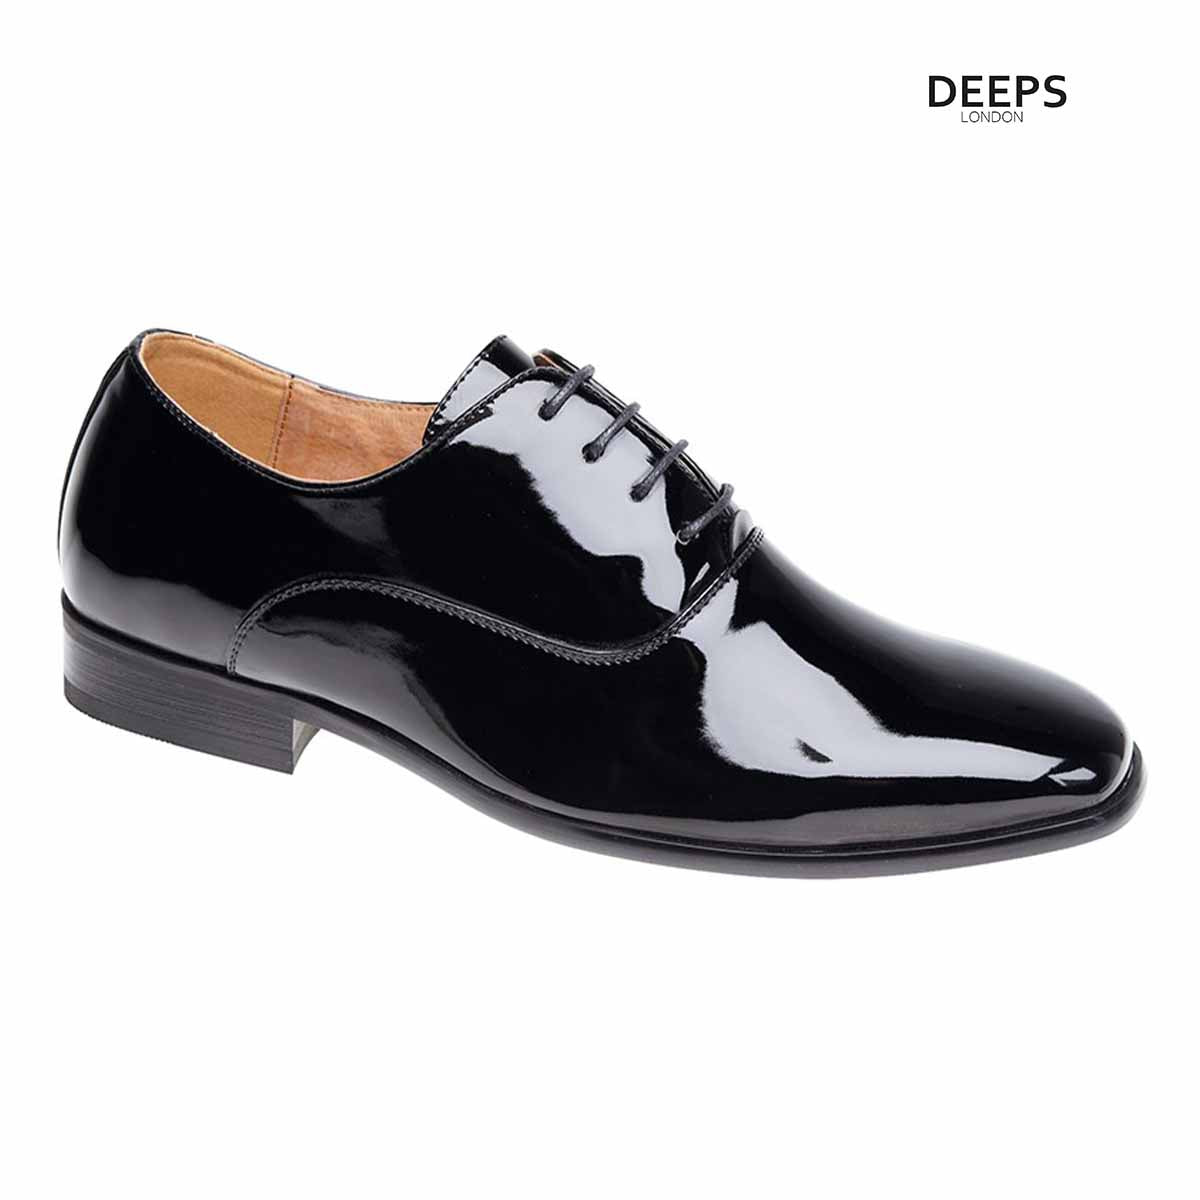 OLIVER LACE UP FAUX LEATHER FORMAL CASUAL PARTY WEDDING SHOES